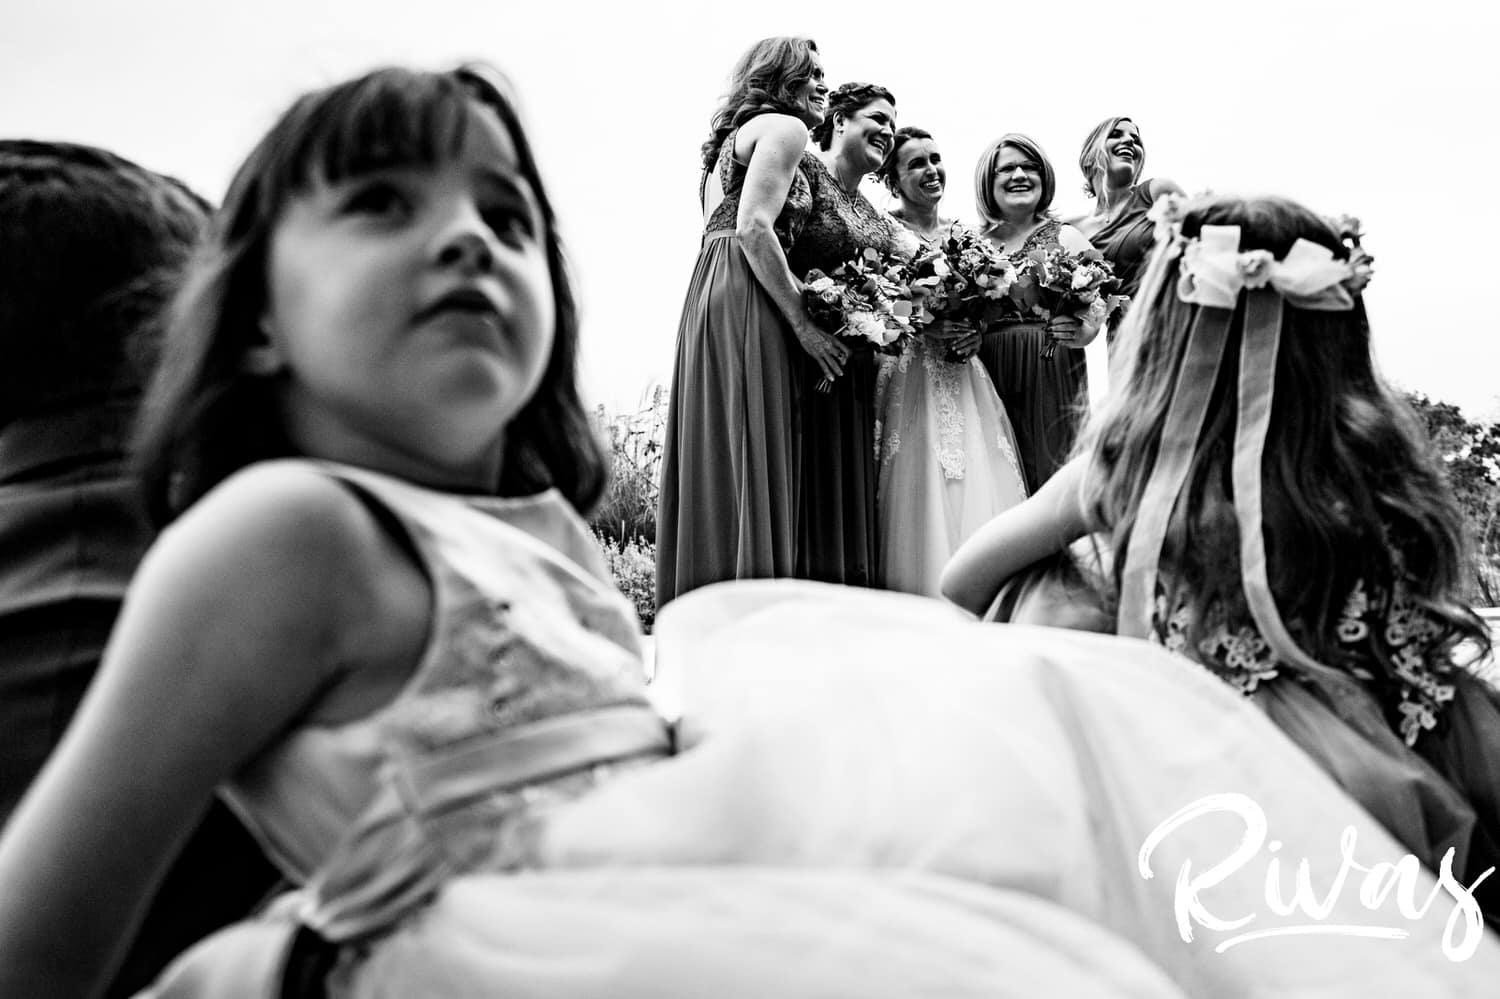 A candid black and white picture taken from behind the shoulder of a flower girl of a bride and her bridesmaids having their photo taken on the afternoon of a rainy wedding day at The Bowery. 